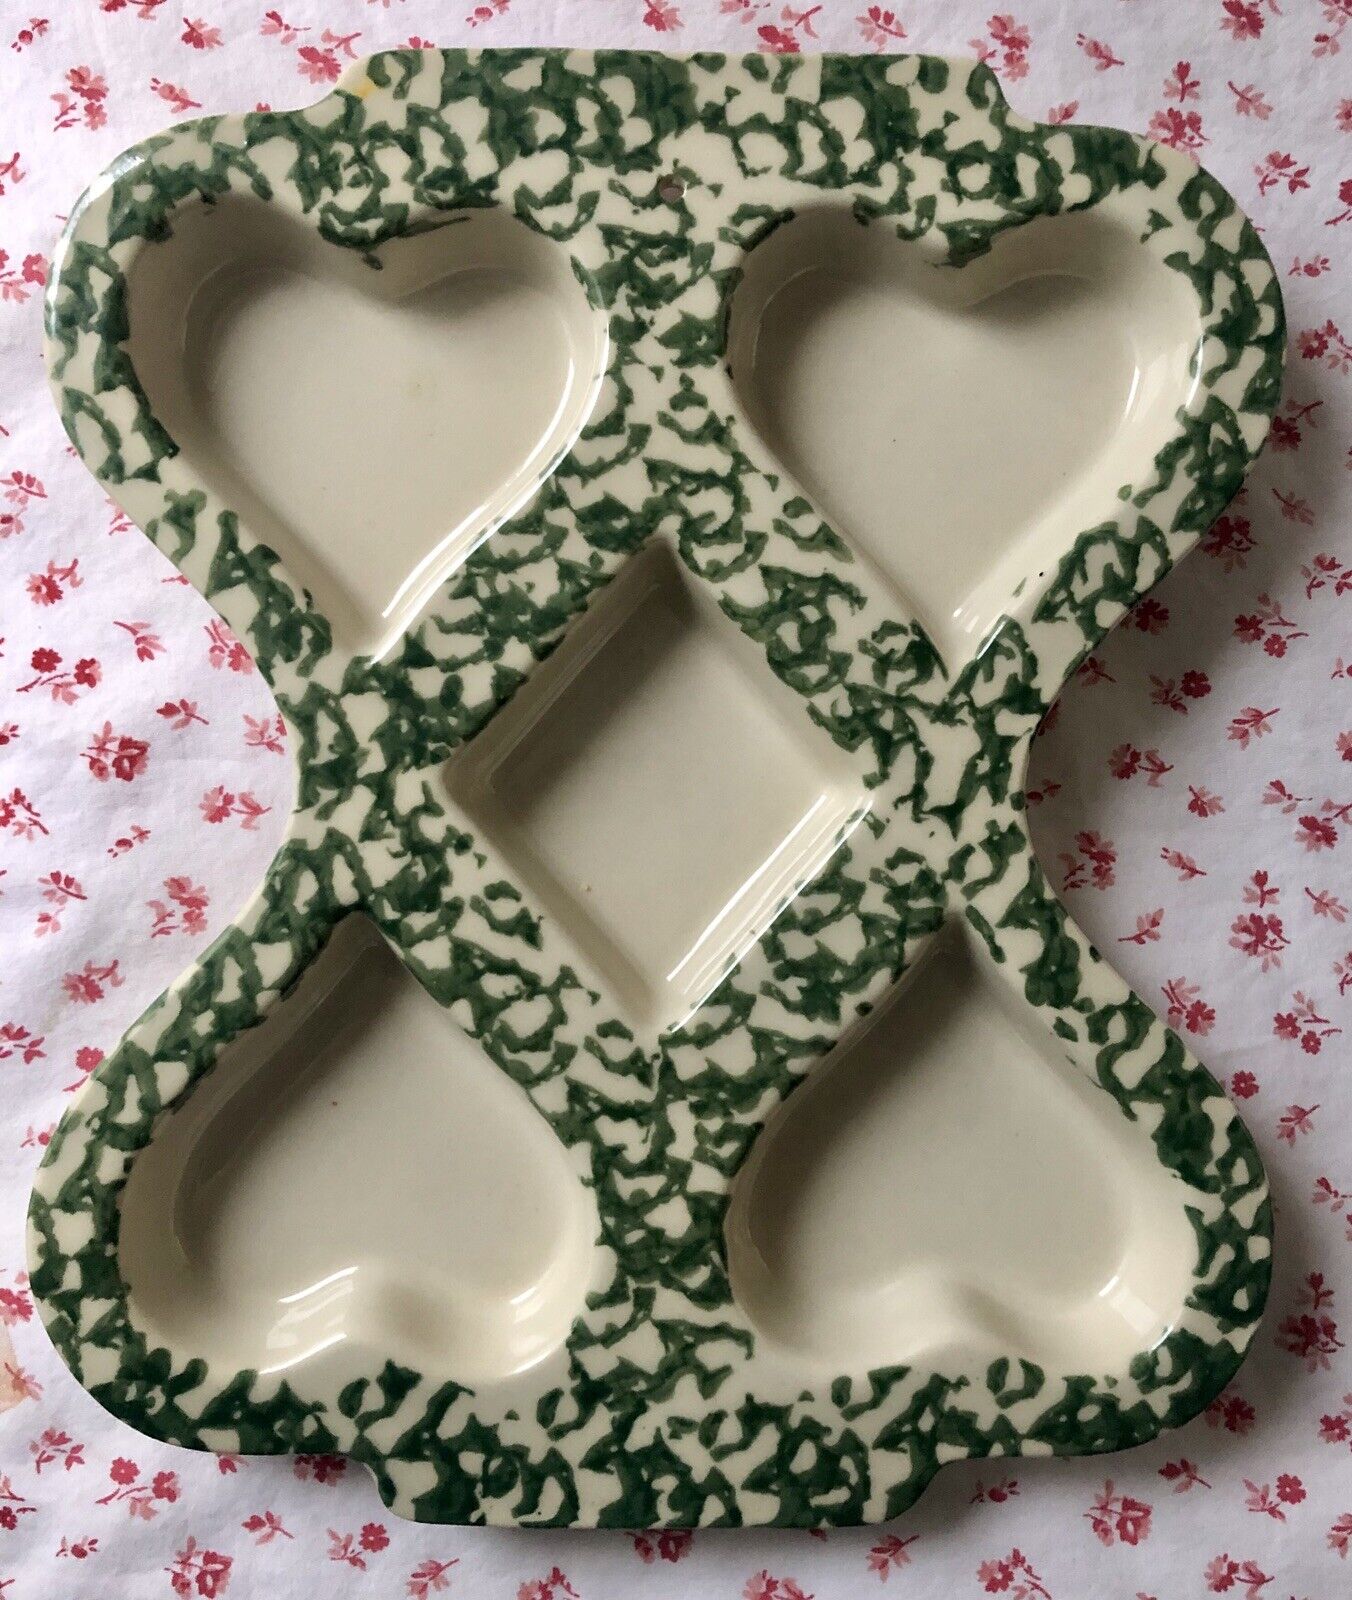 Vintage Low price Friendship Pottery Heart security Muffin Green Spongeware R ~ Pan